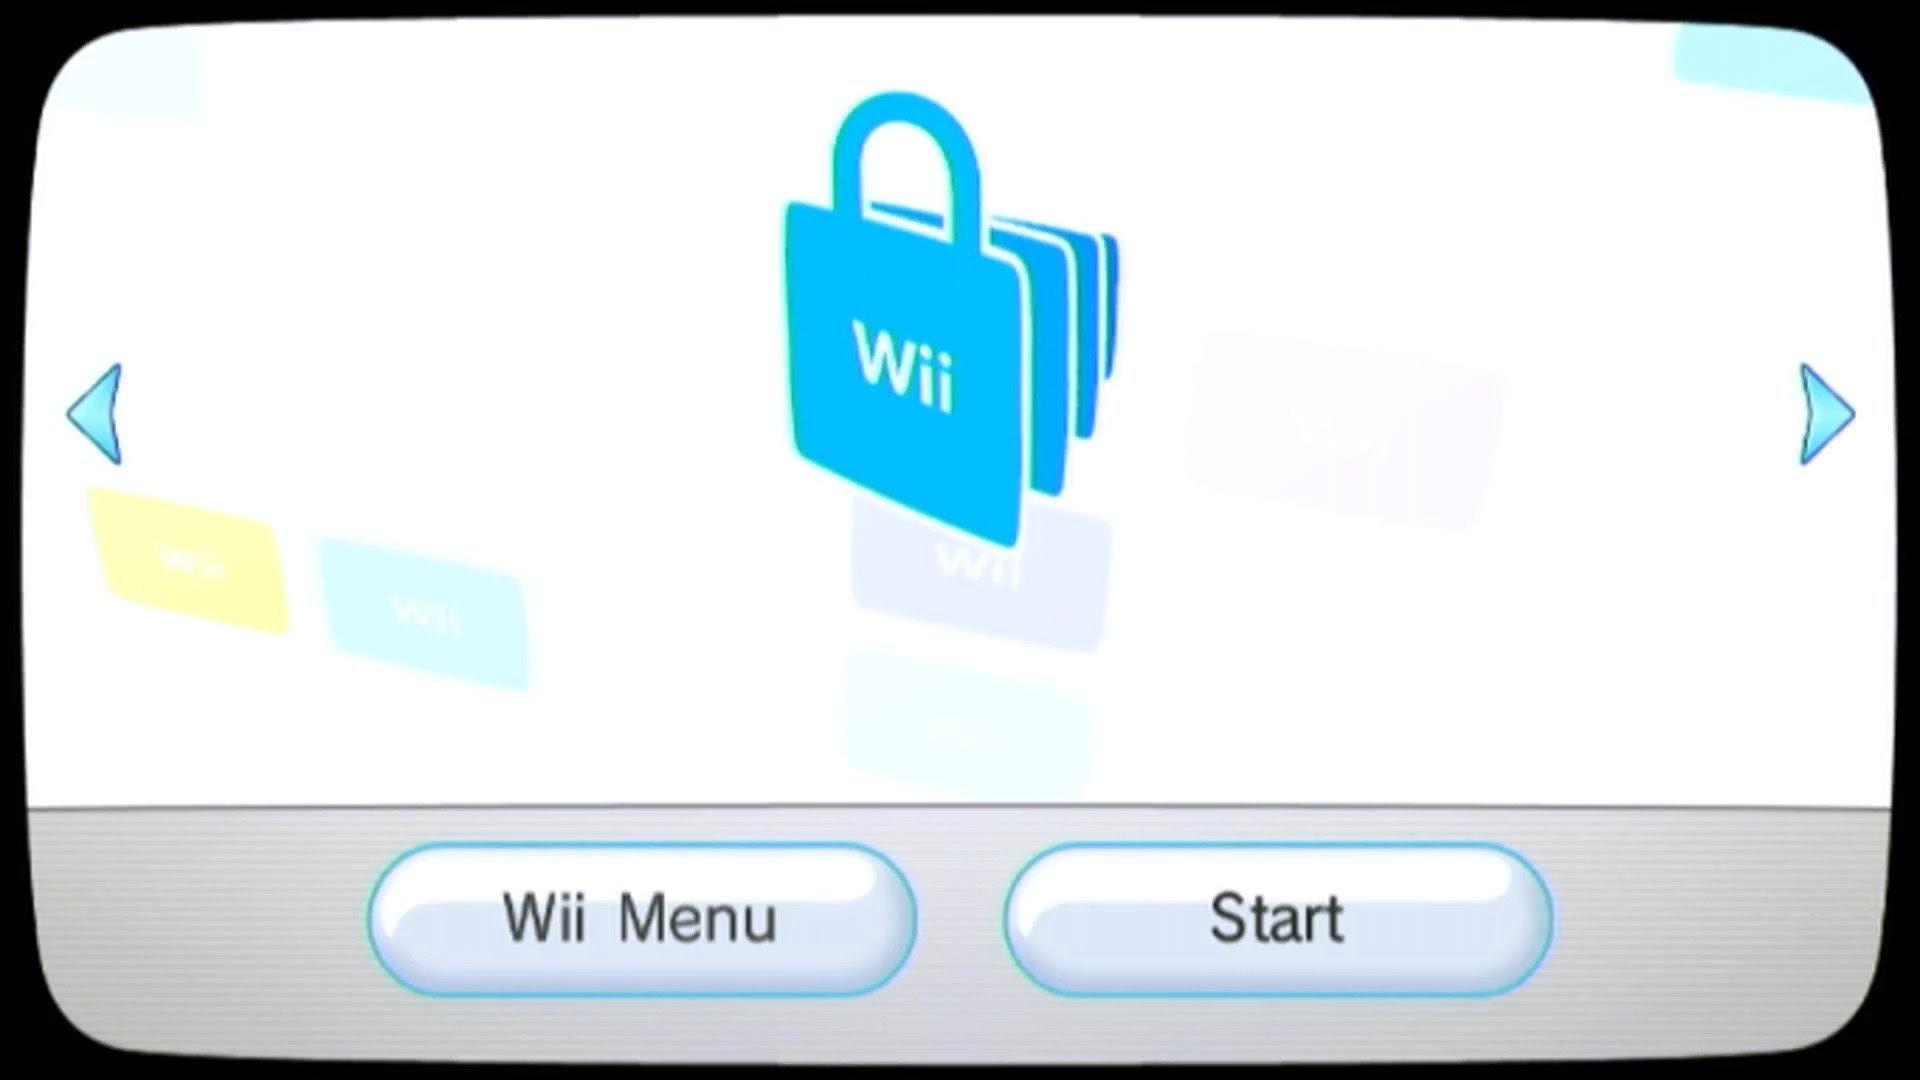 wii channels in dolphin